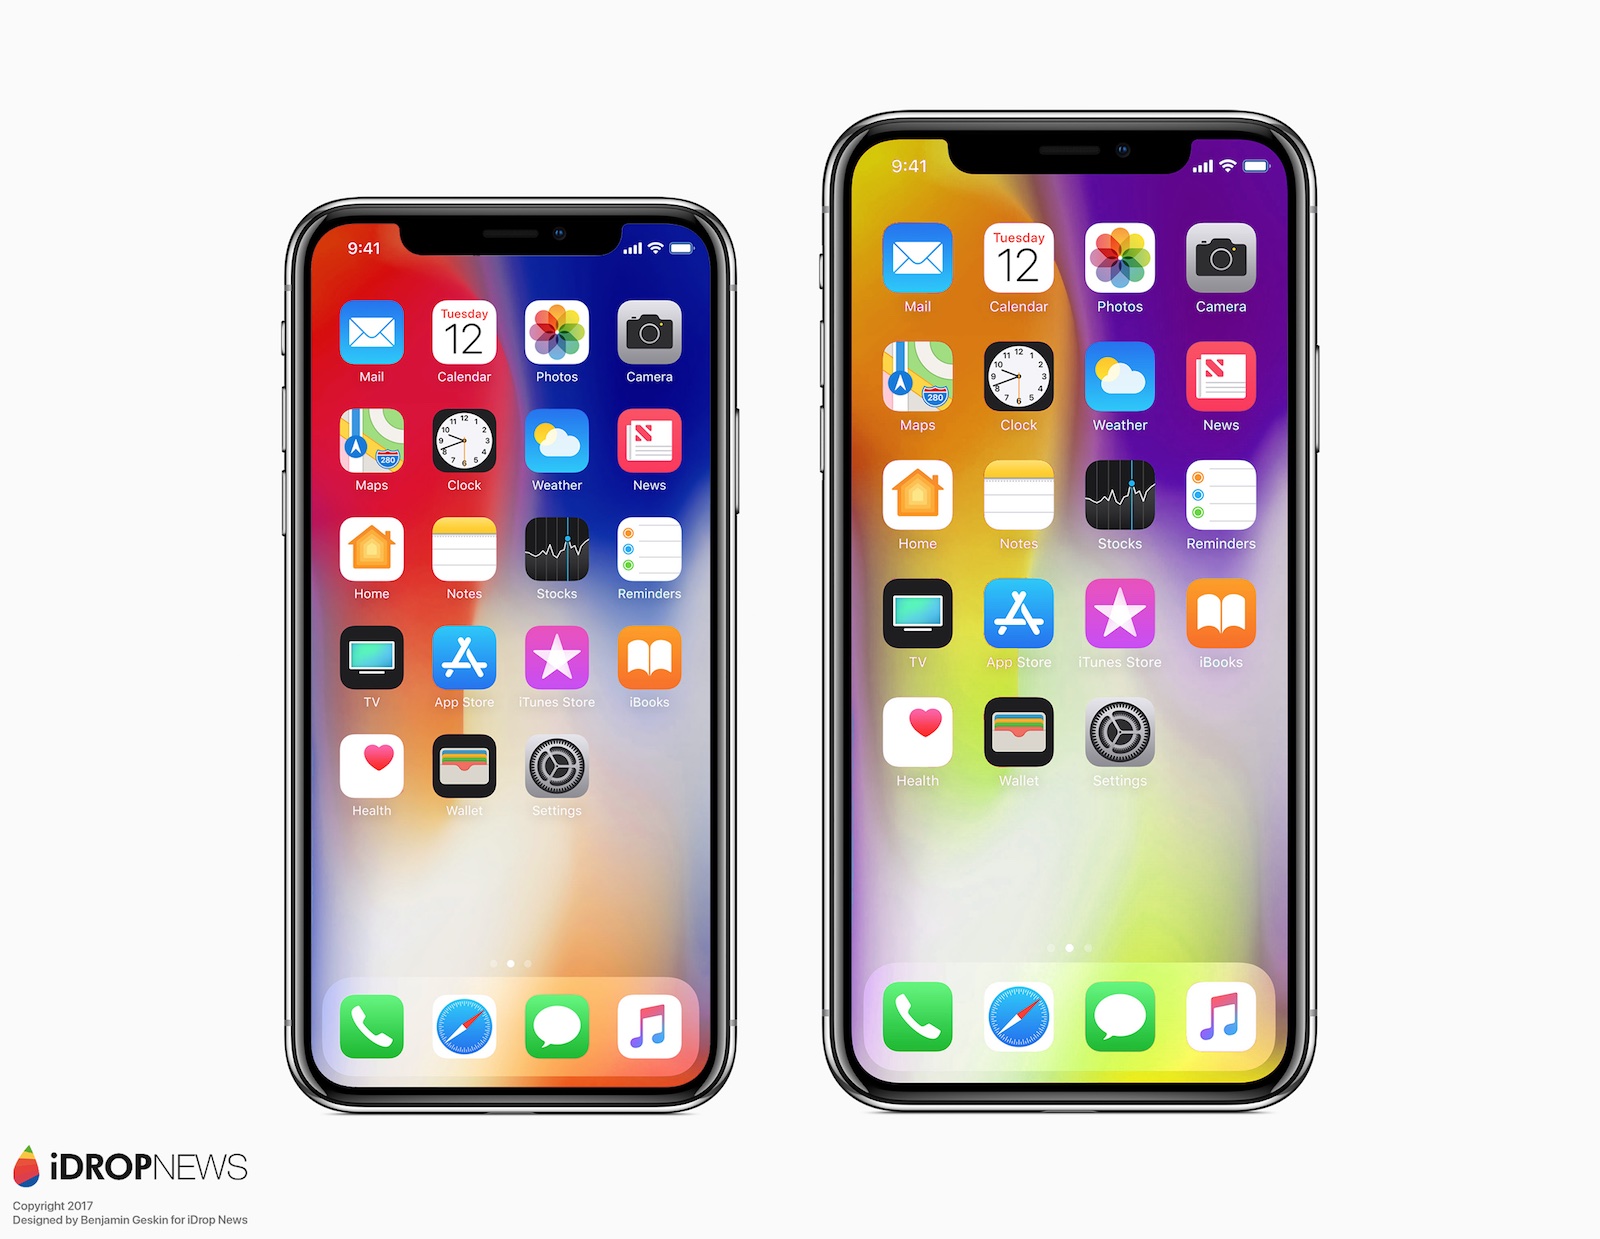 KGI’s Kuo Says 2018 6.1-inch iPhone May Lack 3D Touch in Favor of Improved Glass